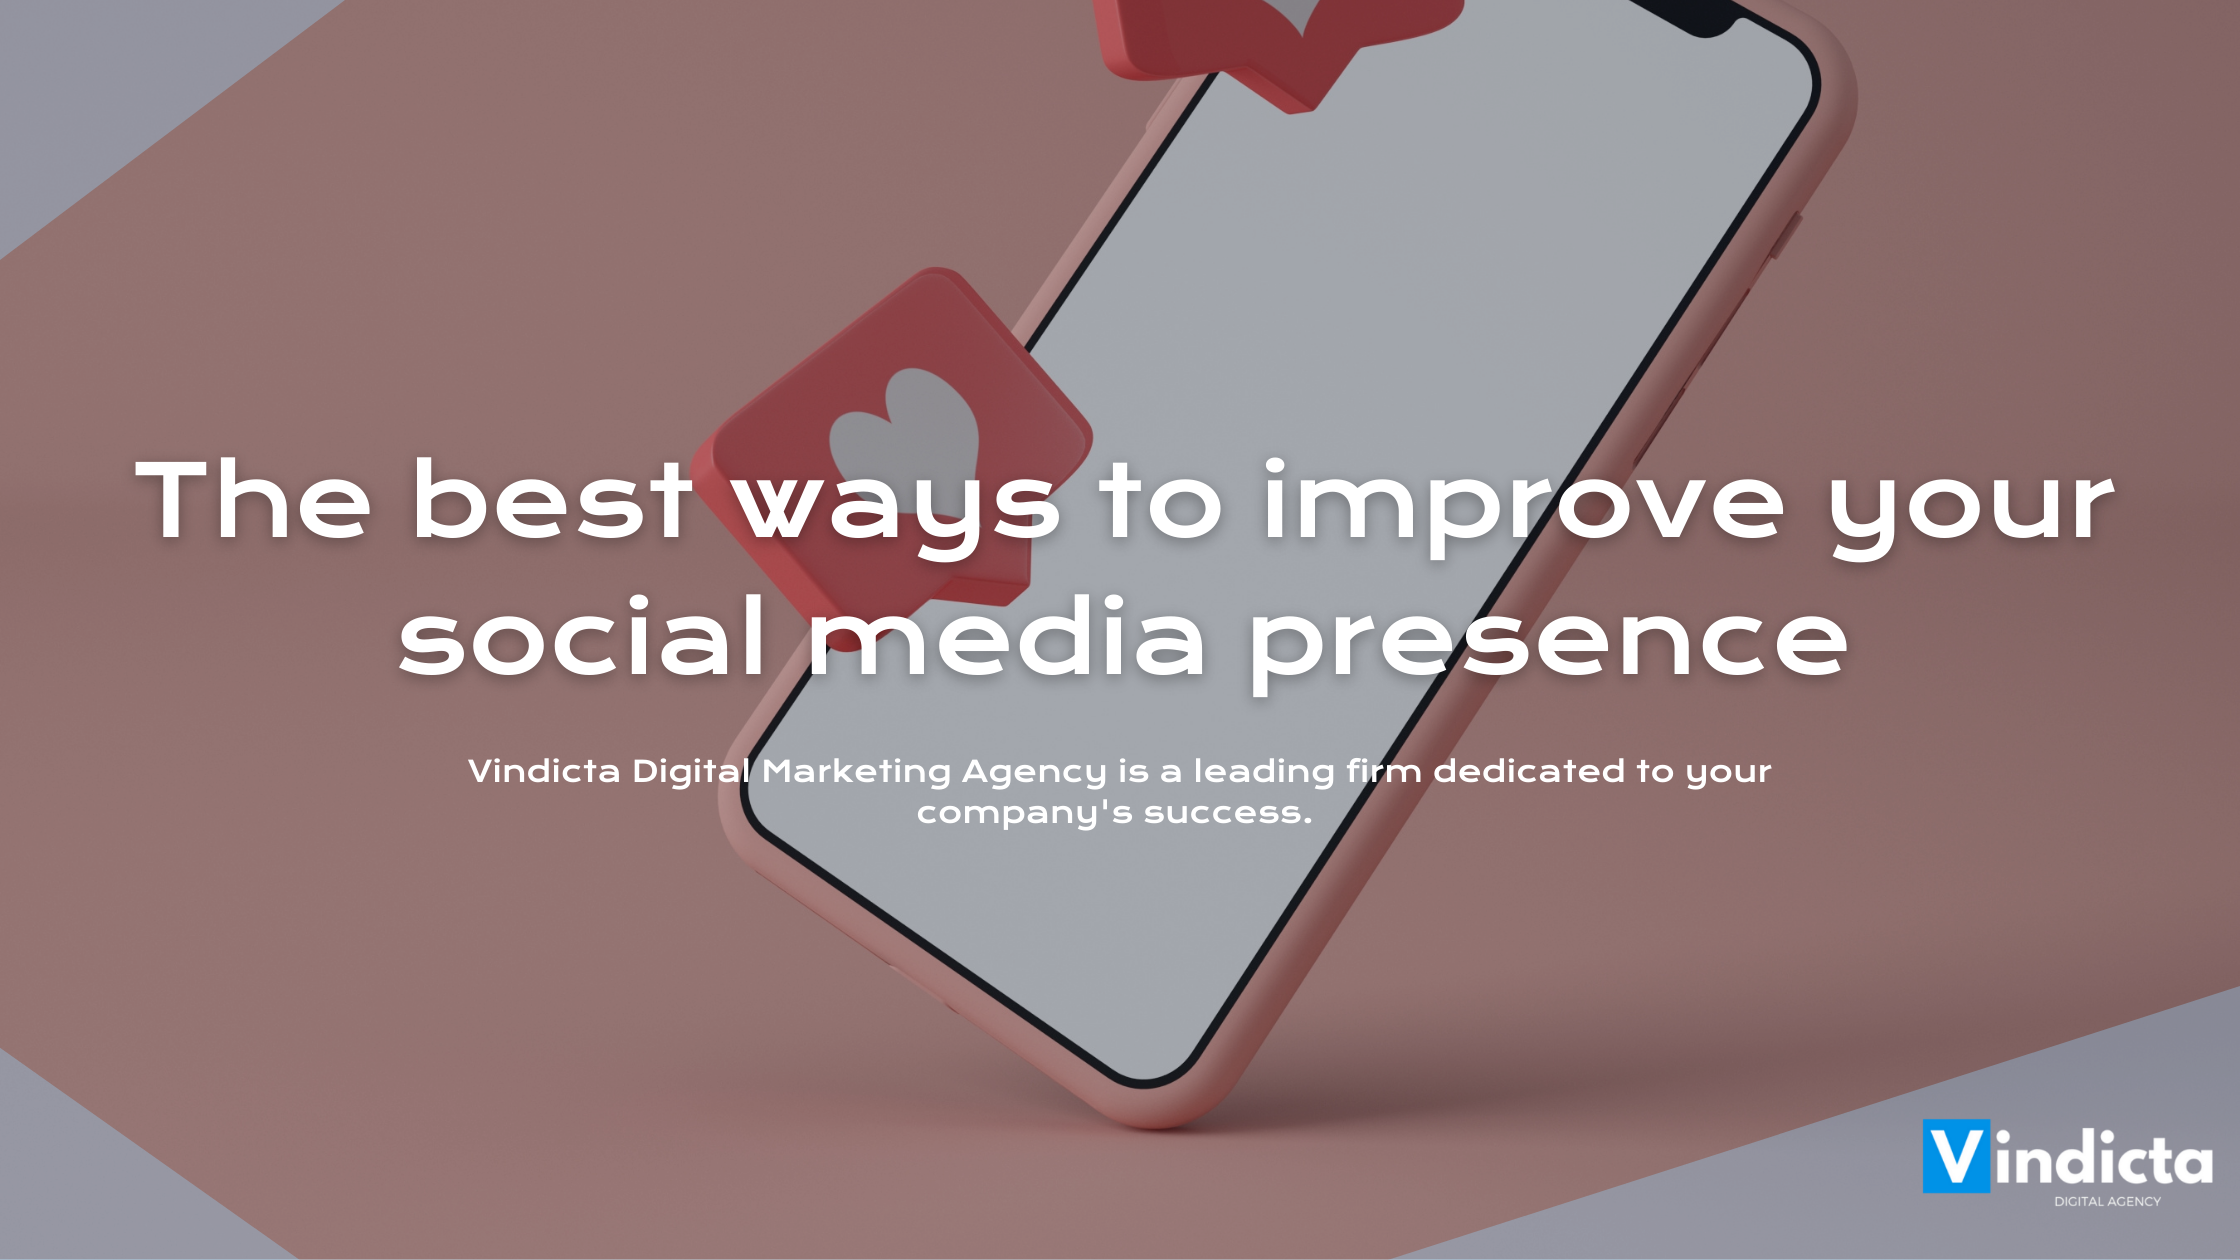 The best ways to improve your social media presence